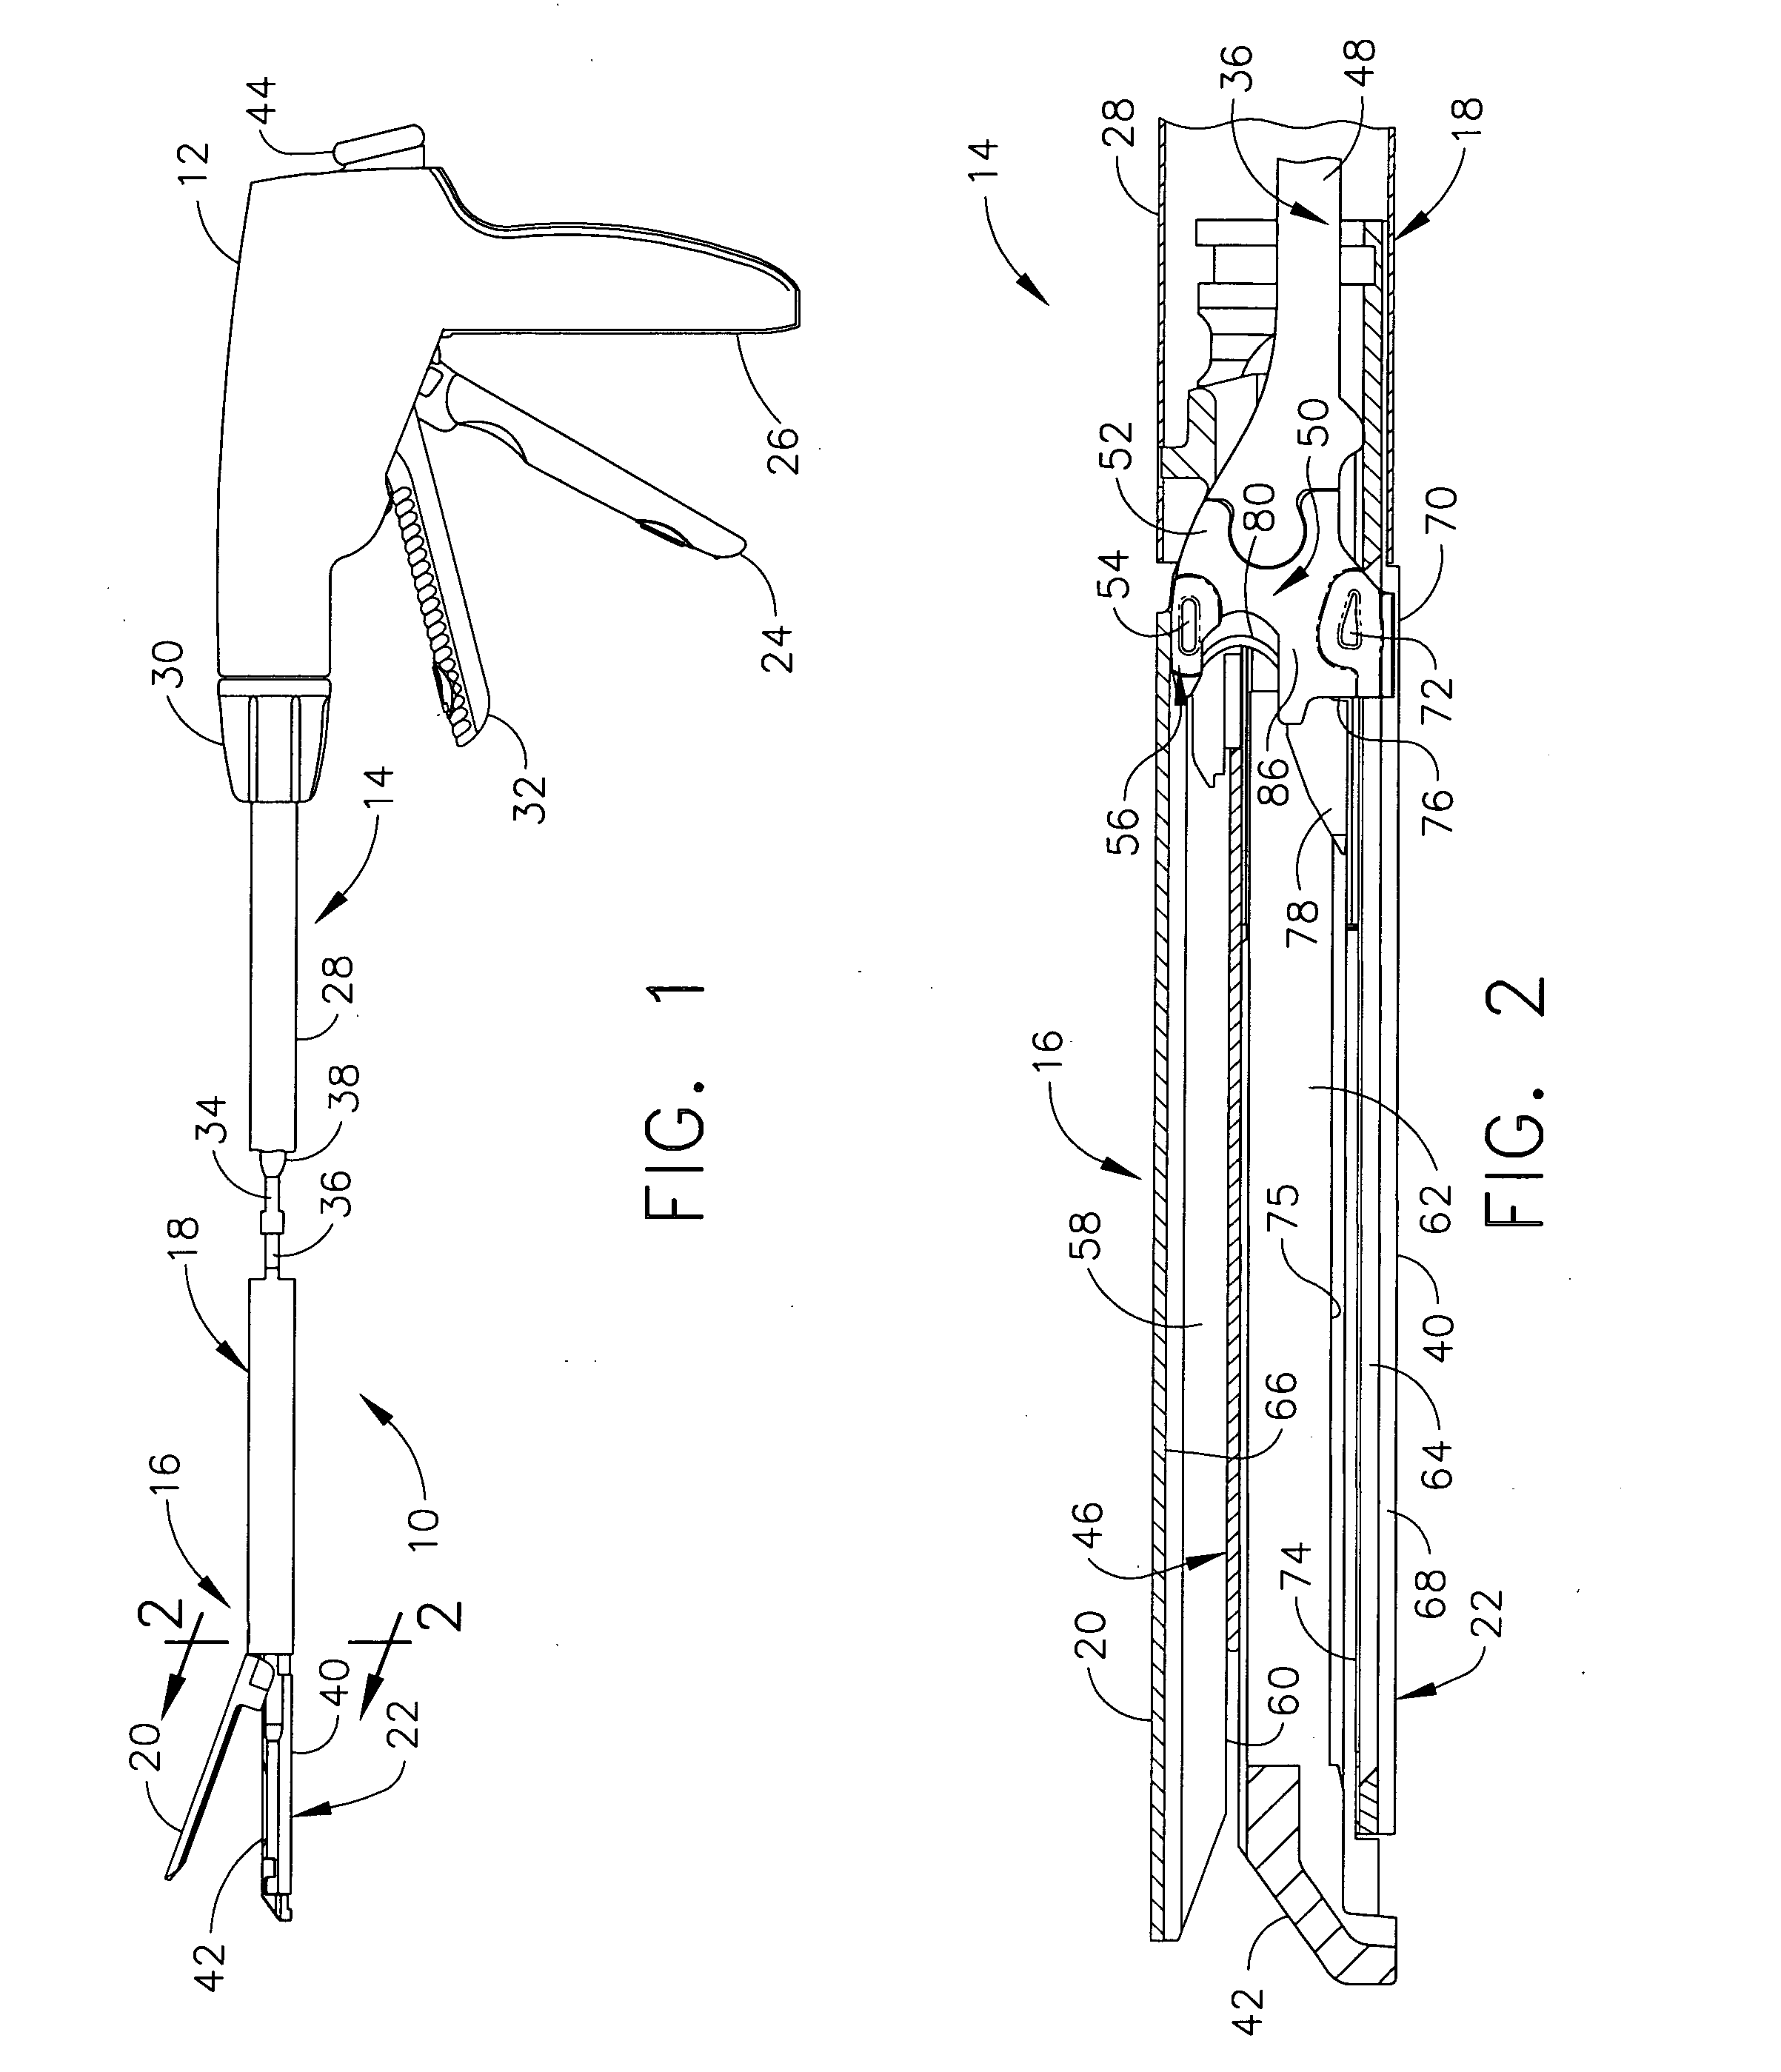 Surgical stapling instrument with mechanical indicator to show levels of tissue compression